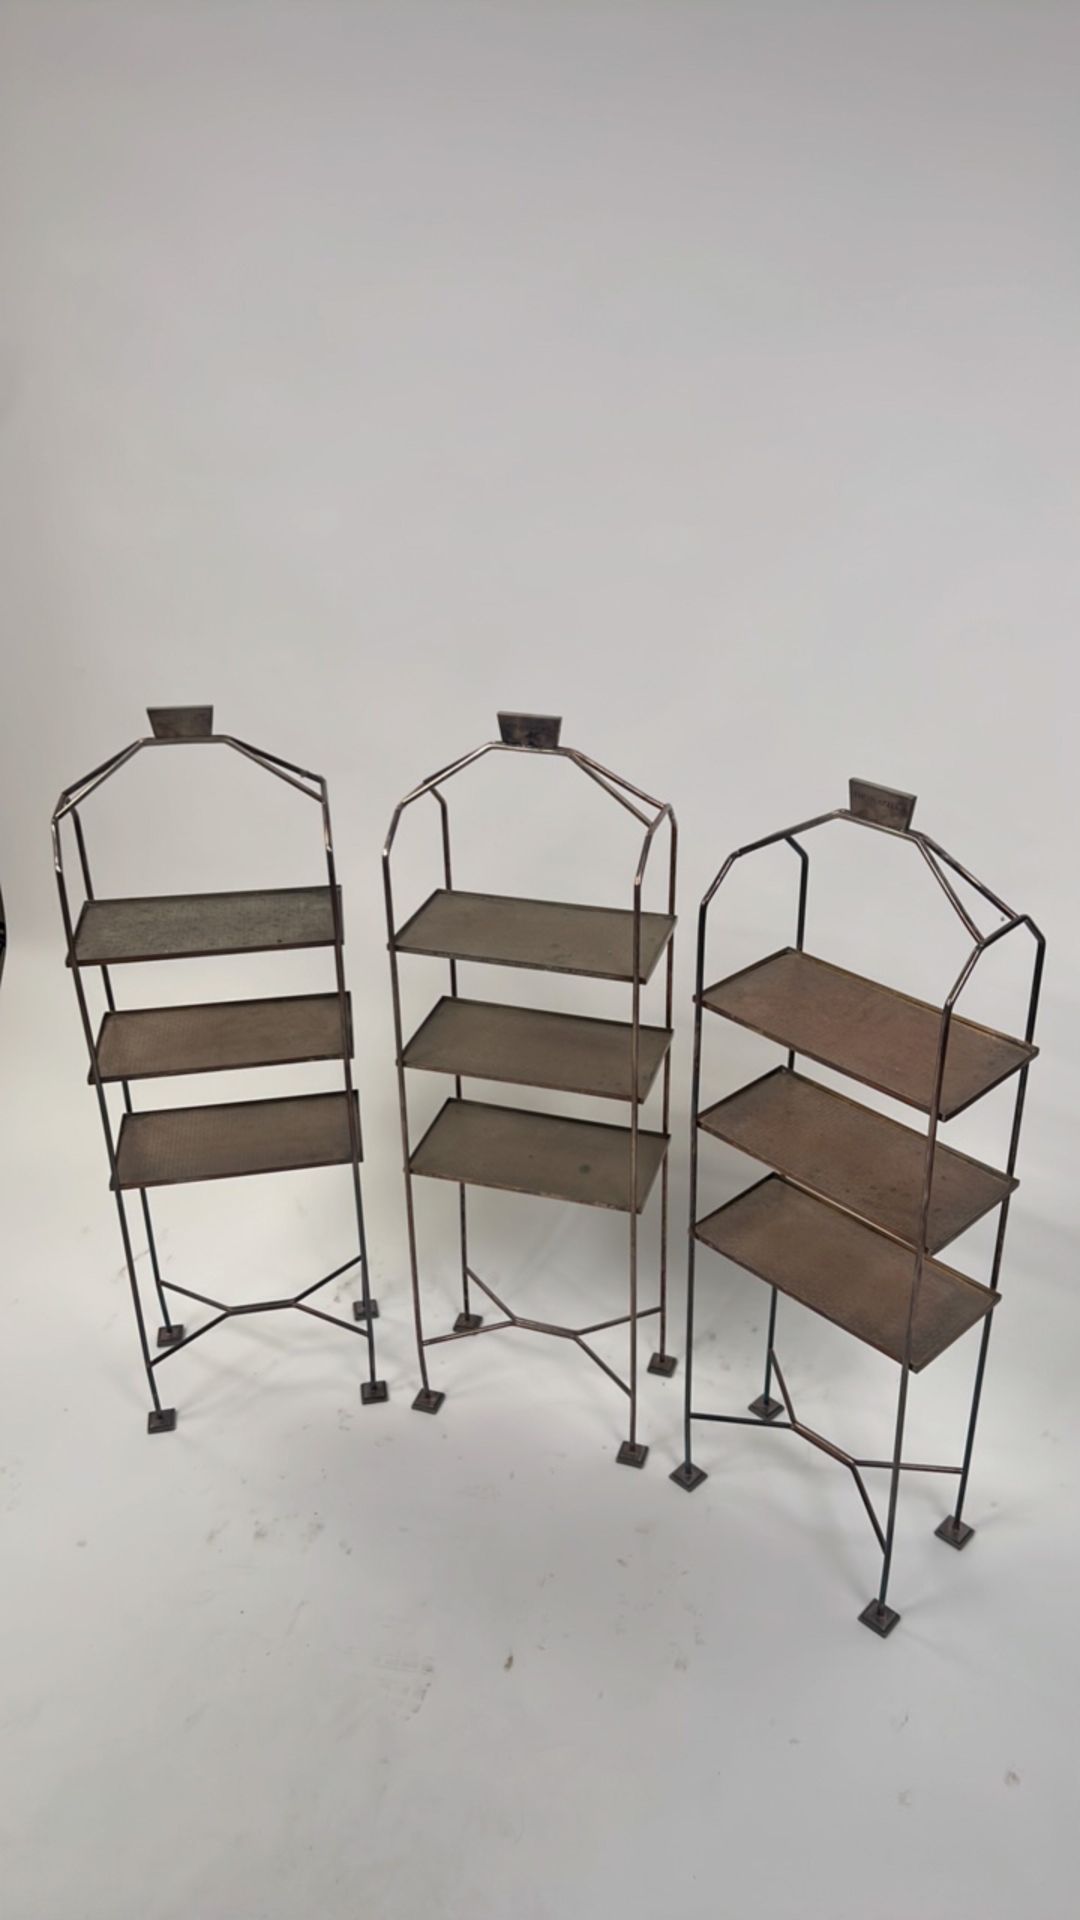 A trio of metal sandwich and cake stands - Image 2 of 8